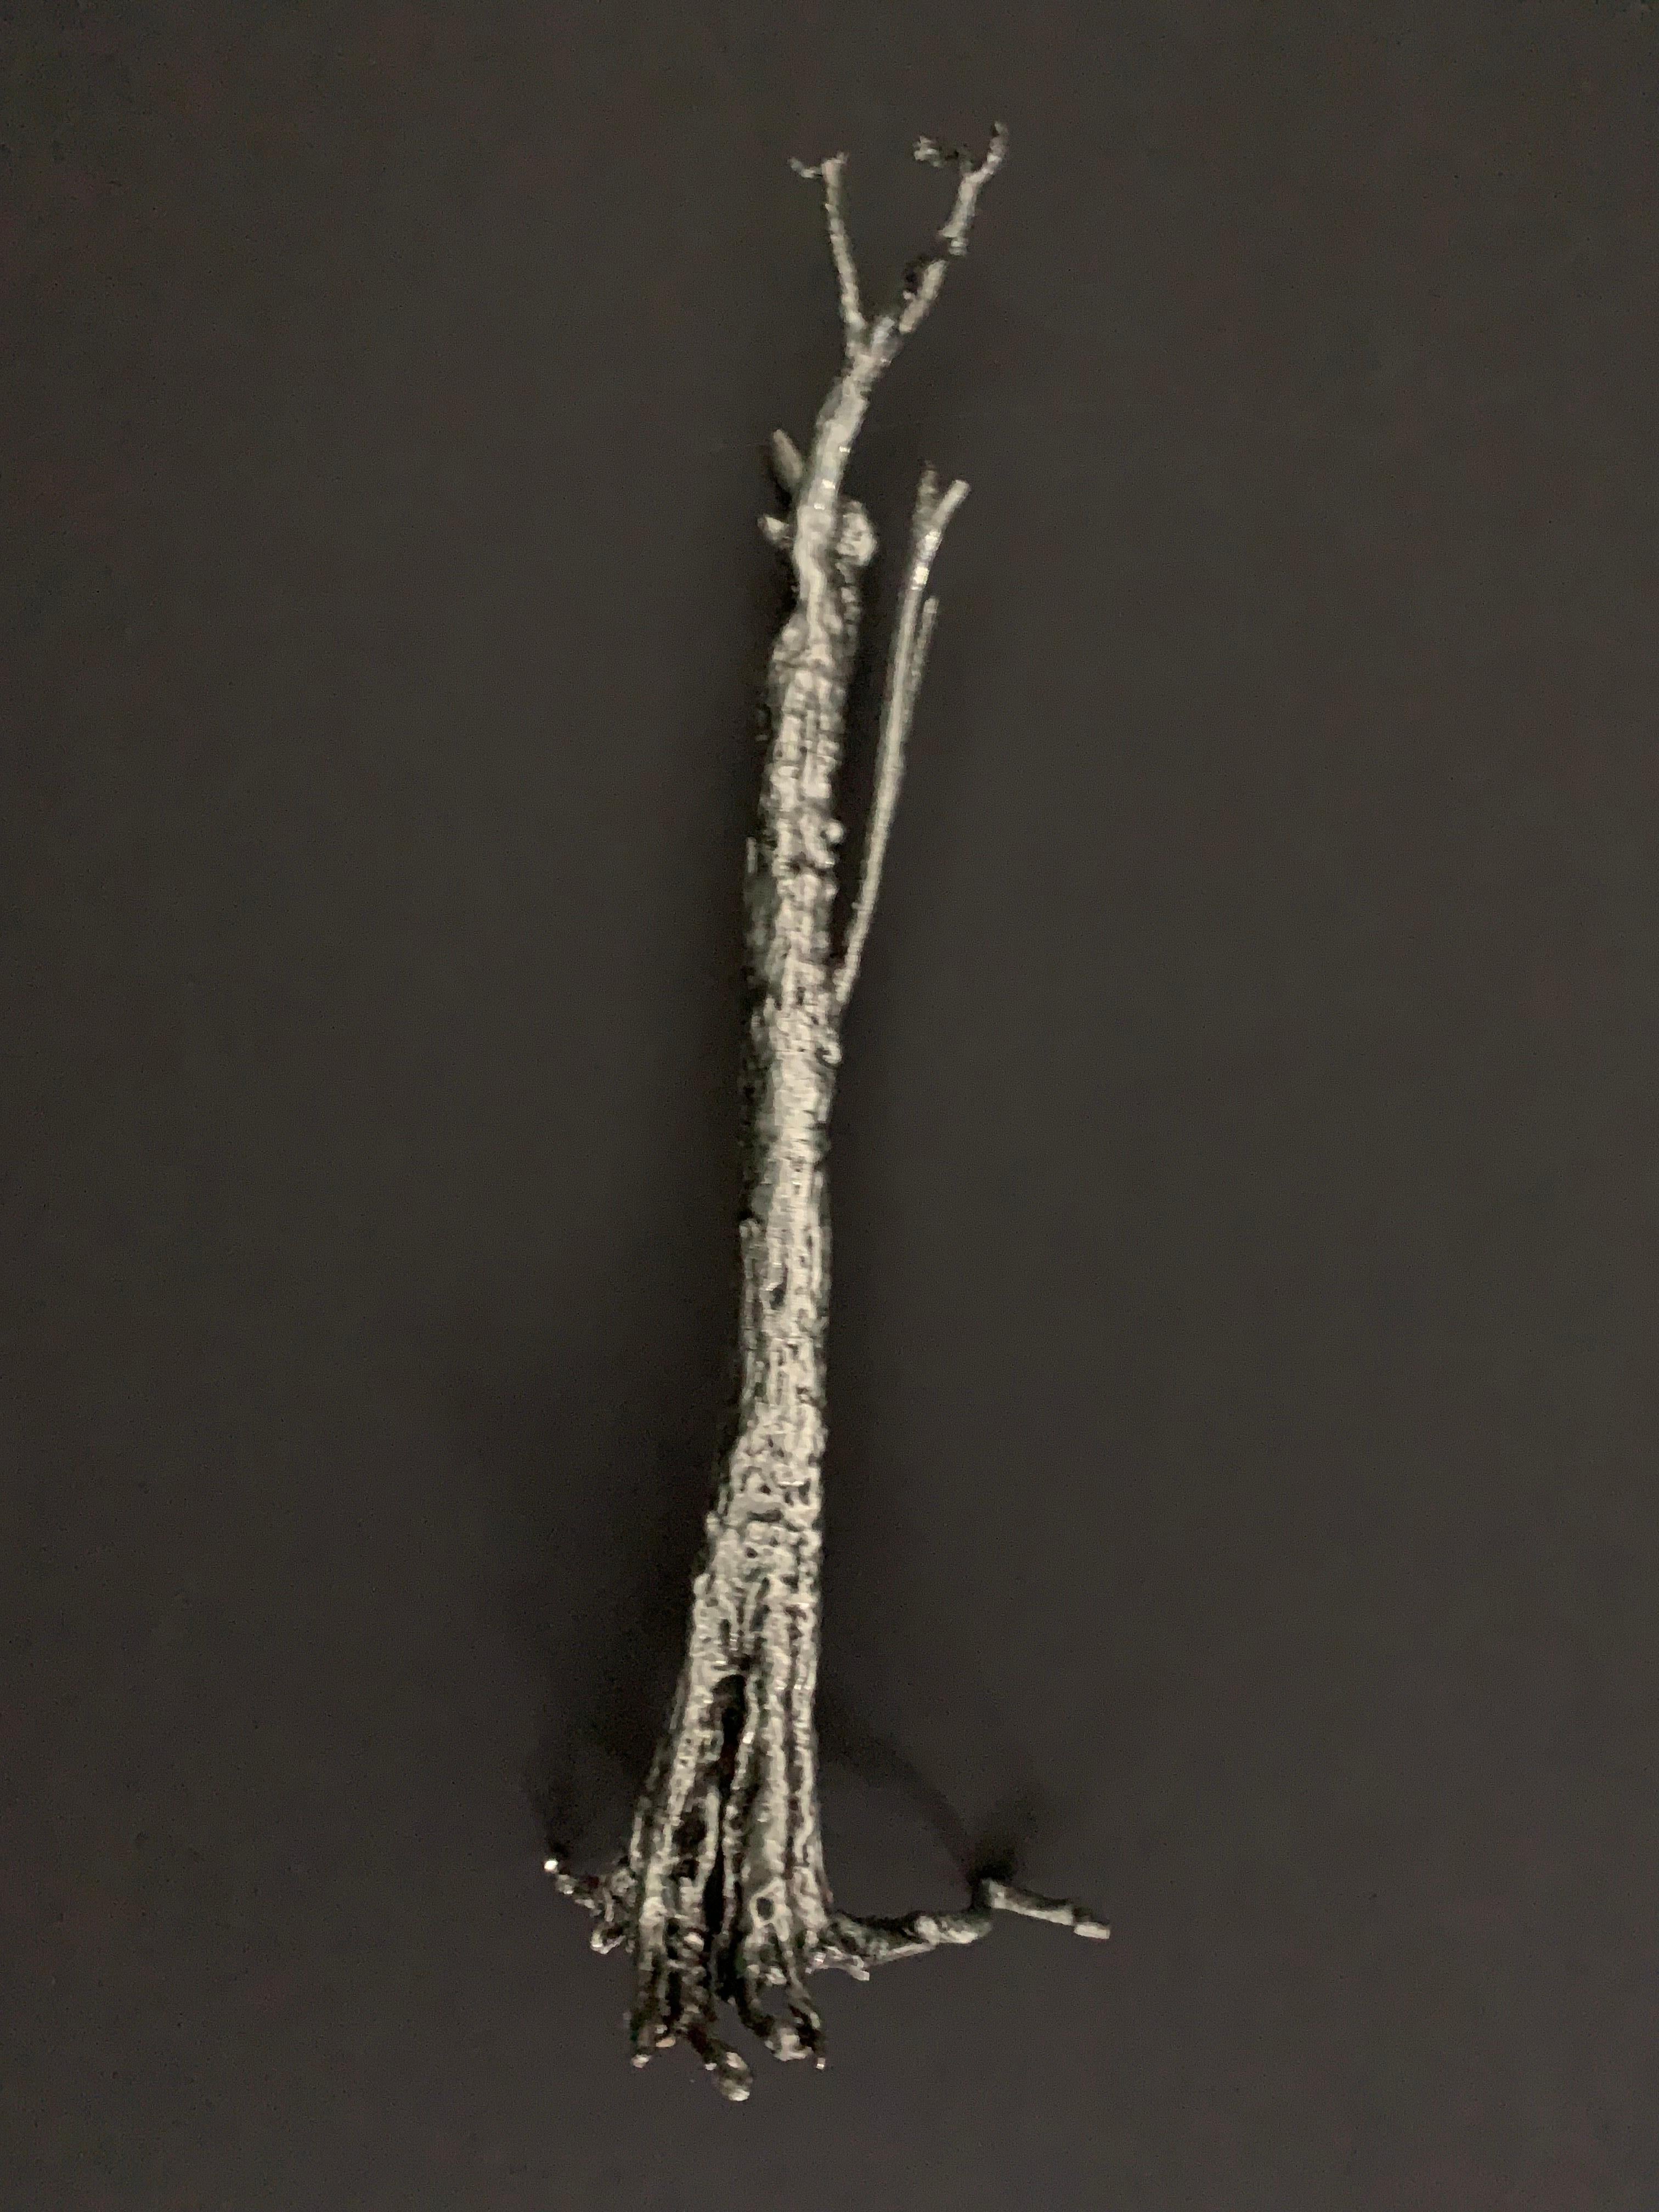 Ai Weiwei Pequi Tree Minature Tin Sculpture 1/100 Scale Edition of 250 For Sale 1